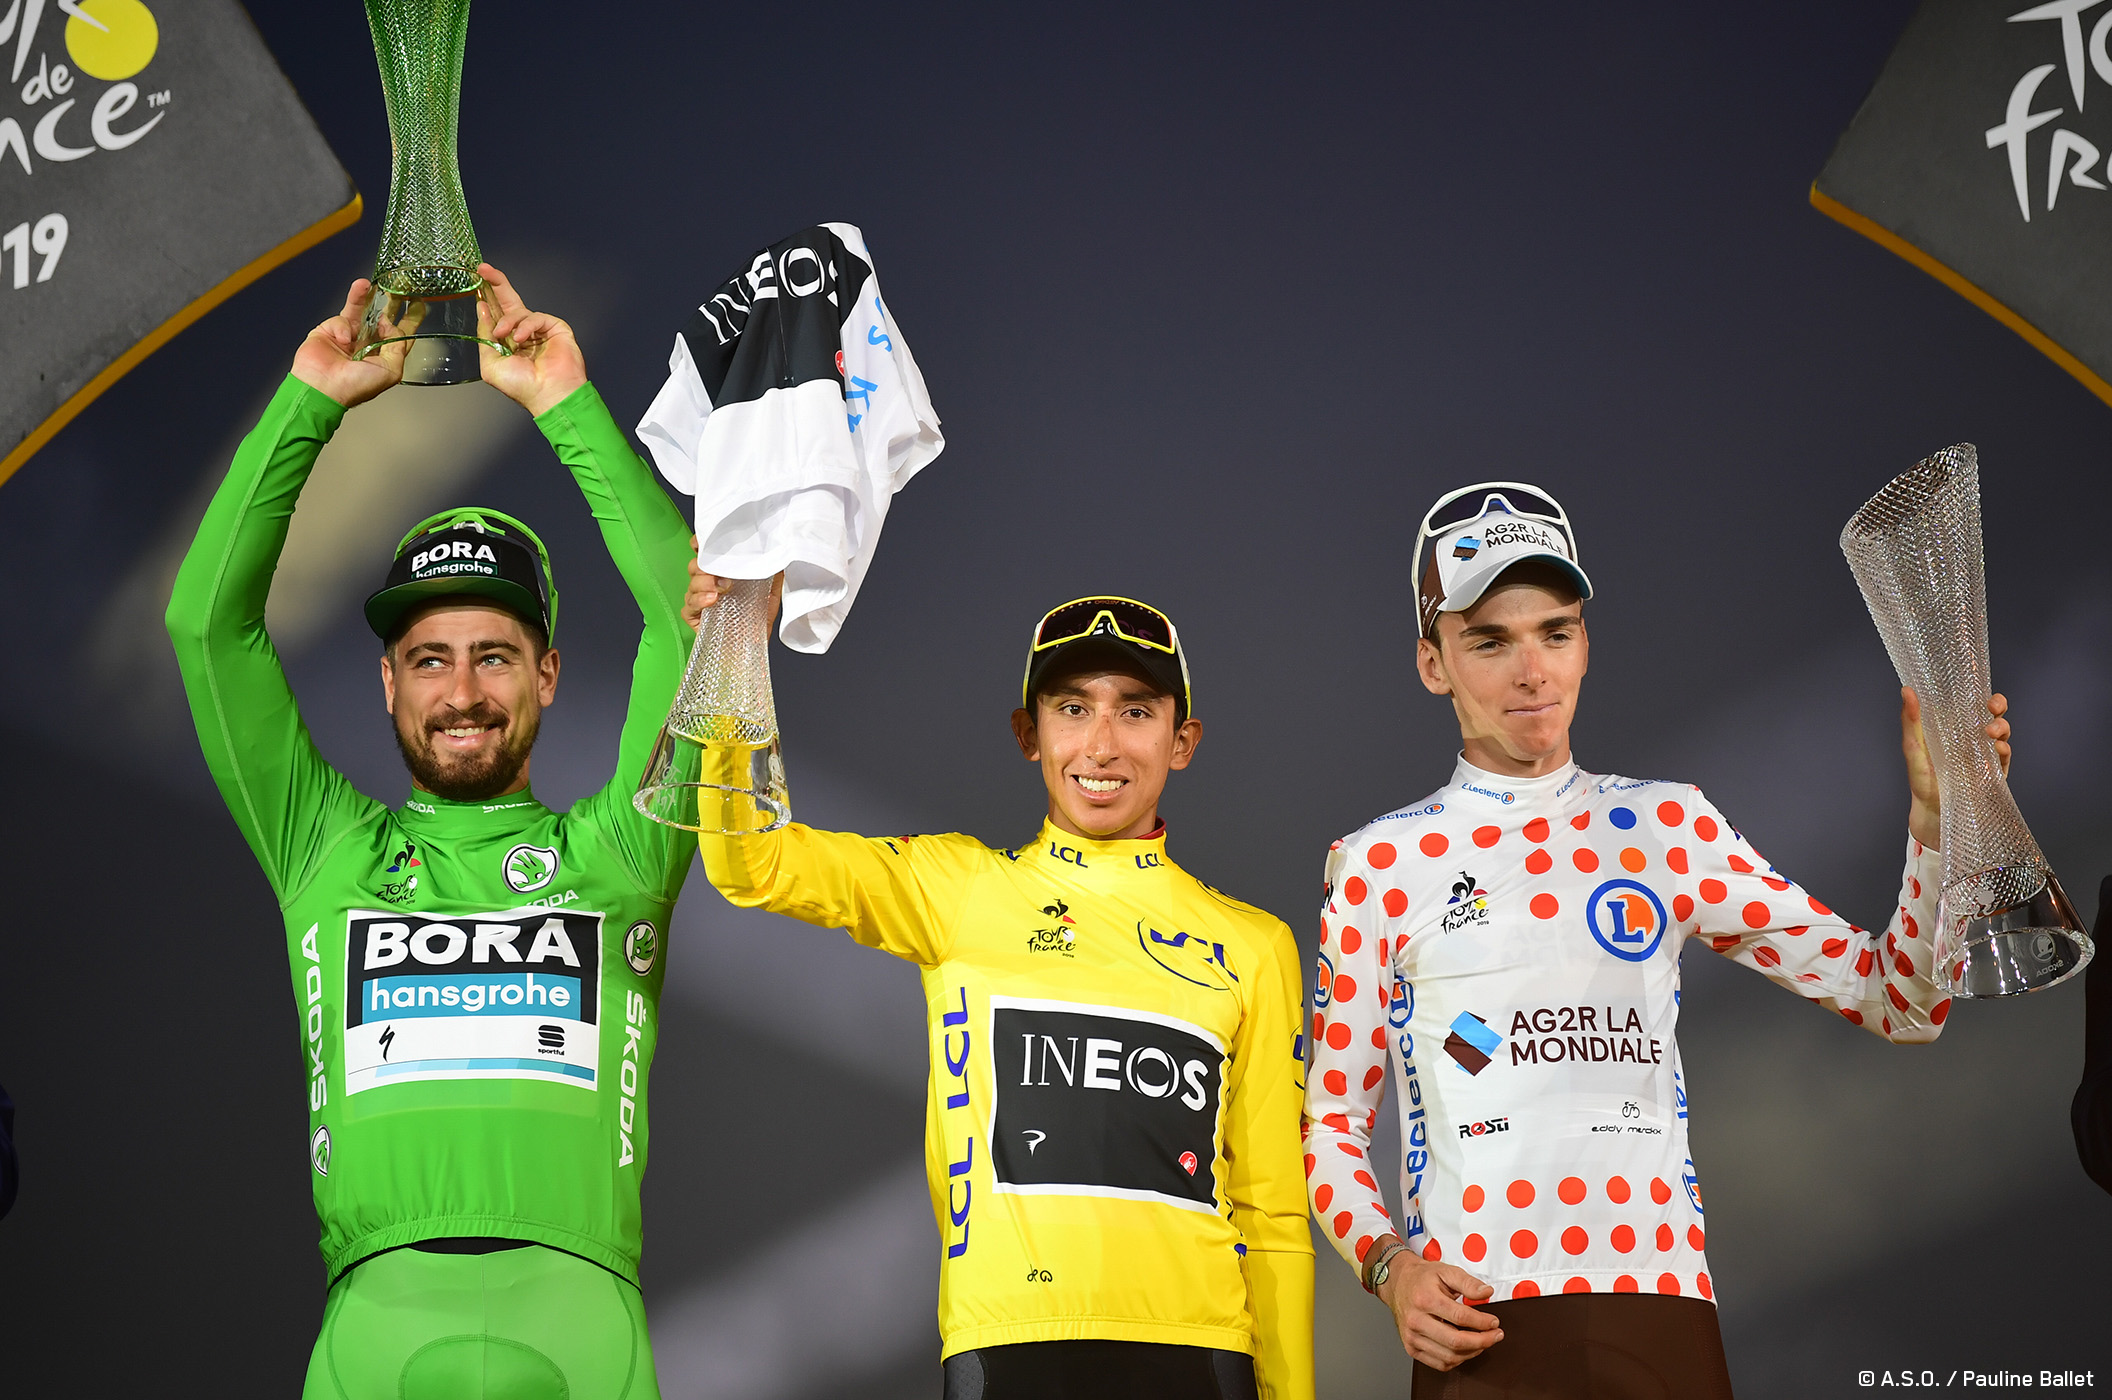 This is what the Tour de France™ winners' jerseys look like